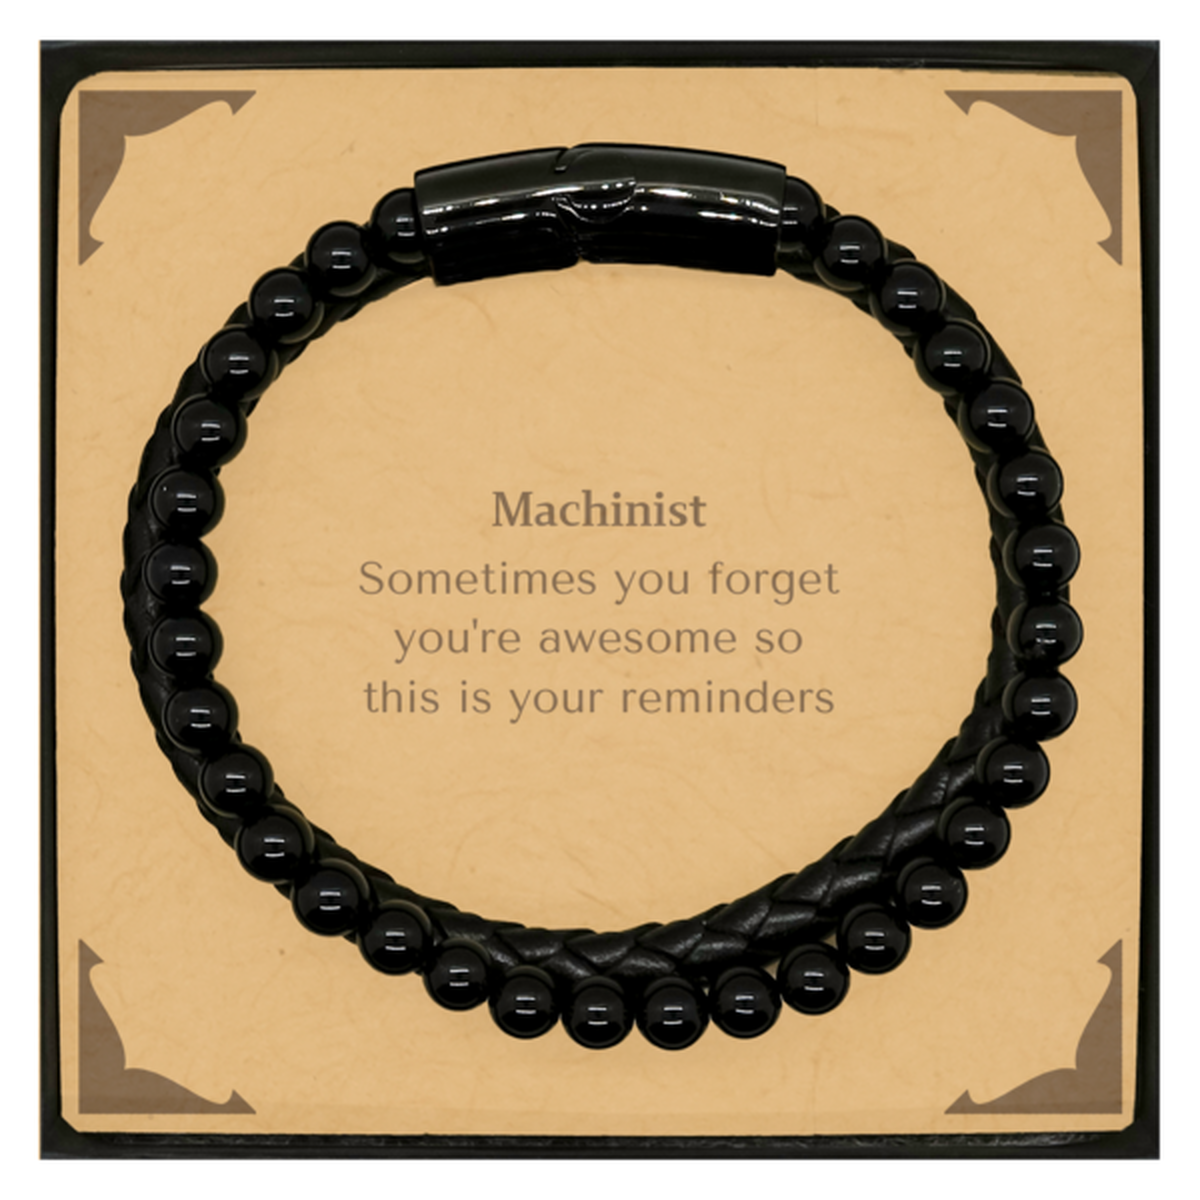 Sentimental Machinist Stone Leather Bracelets, Machinist Sometimes you forget you're awesome so this is your reminders, Graduation Christmas Birthday Gifts for Machinist, Men, Women, Coworkers